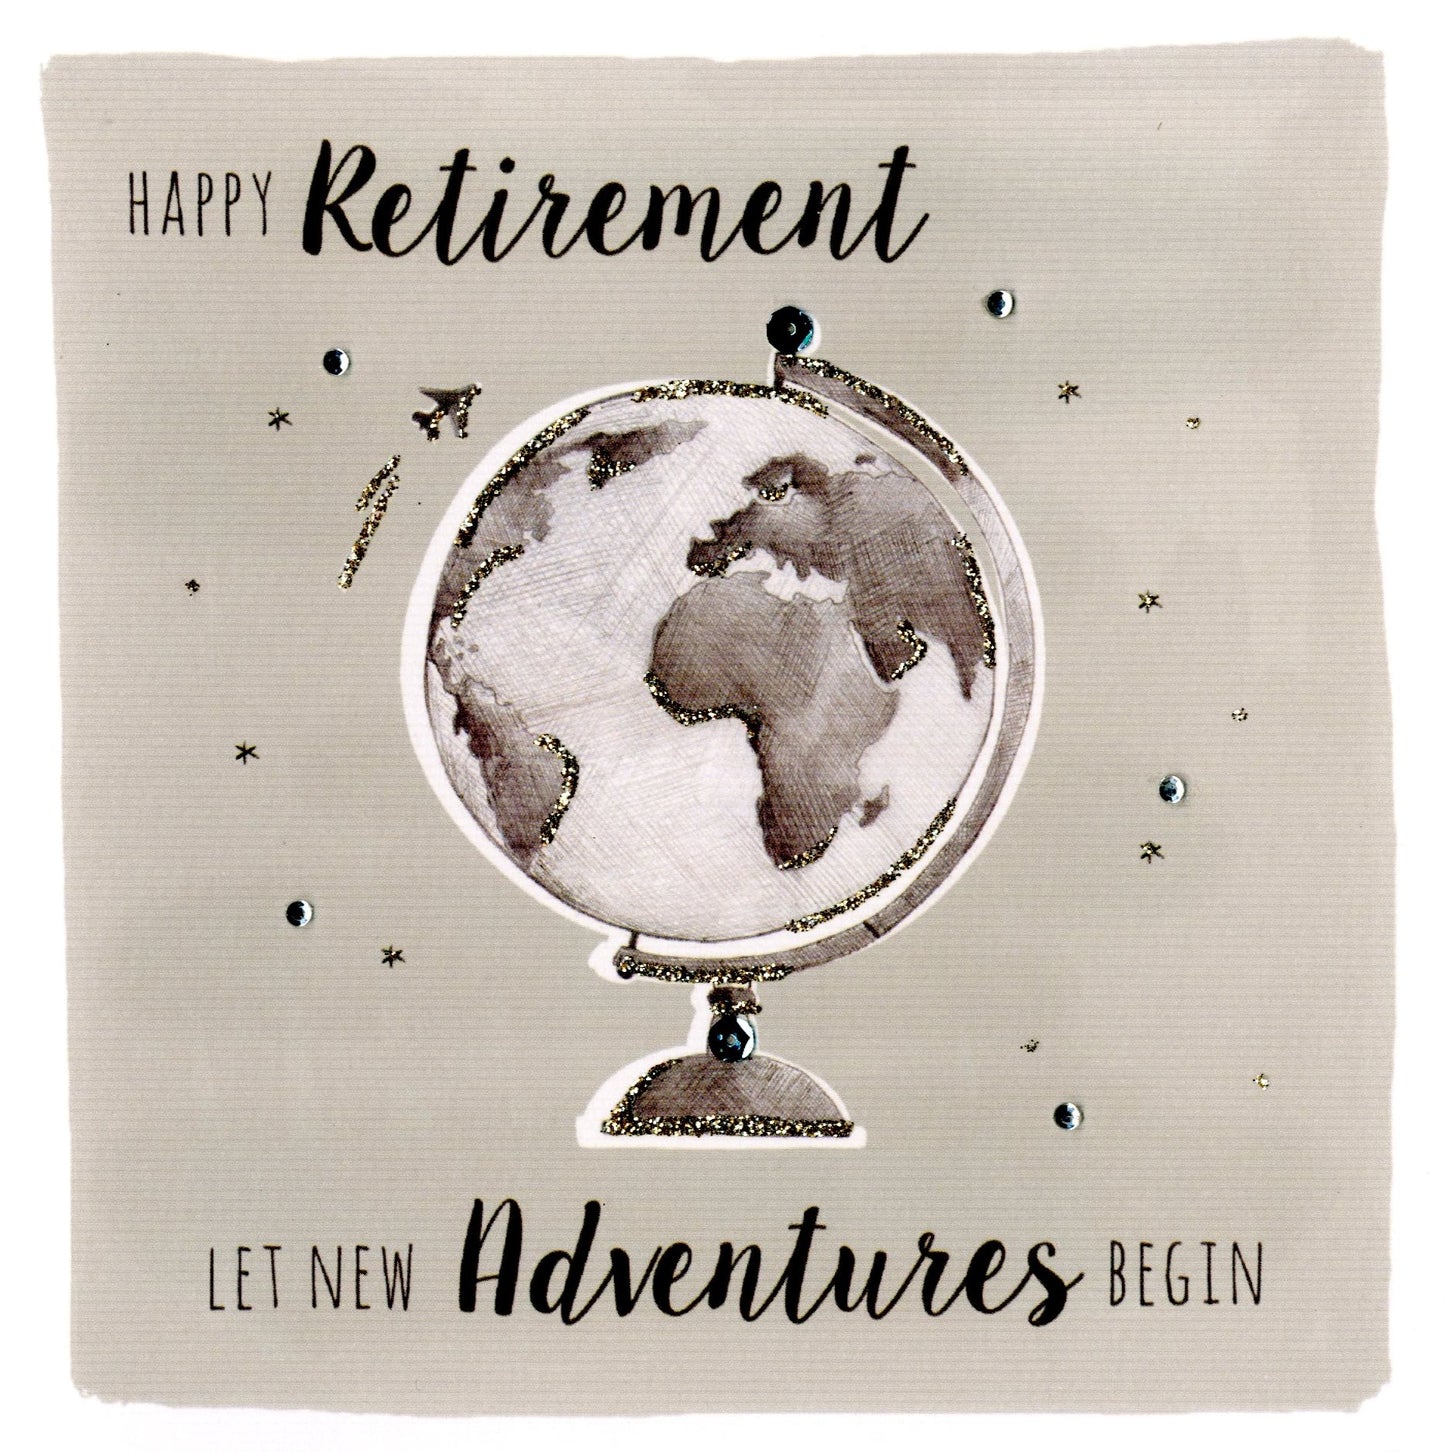 Happy Retirement Embellished Greeting Card